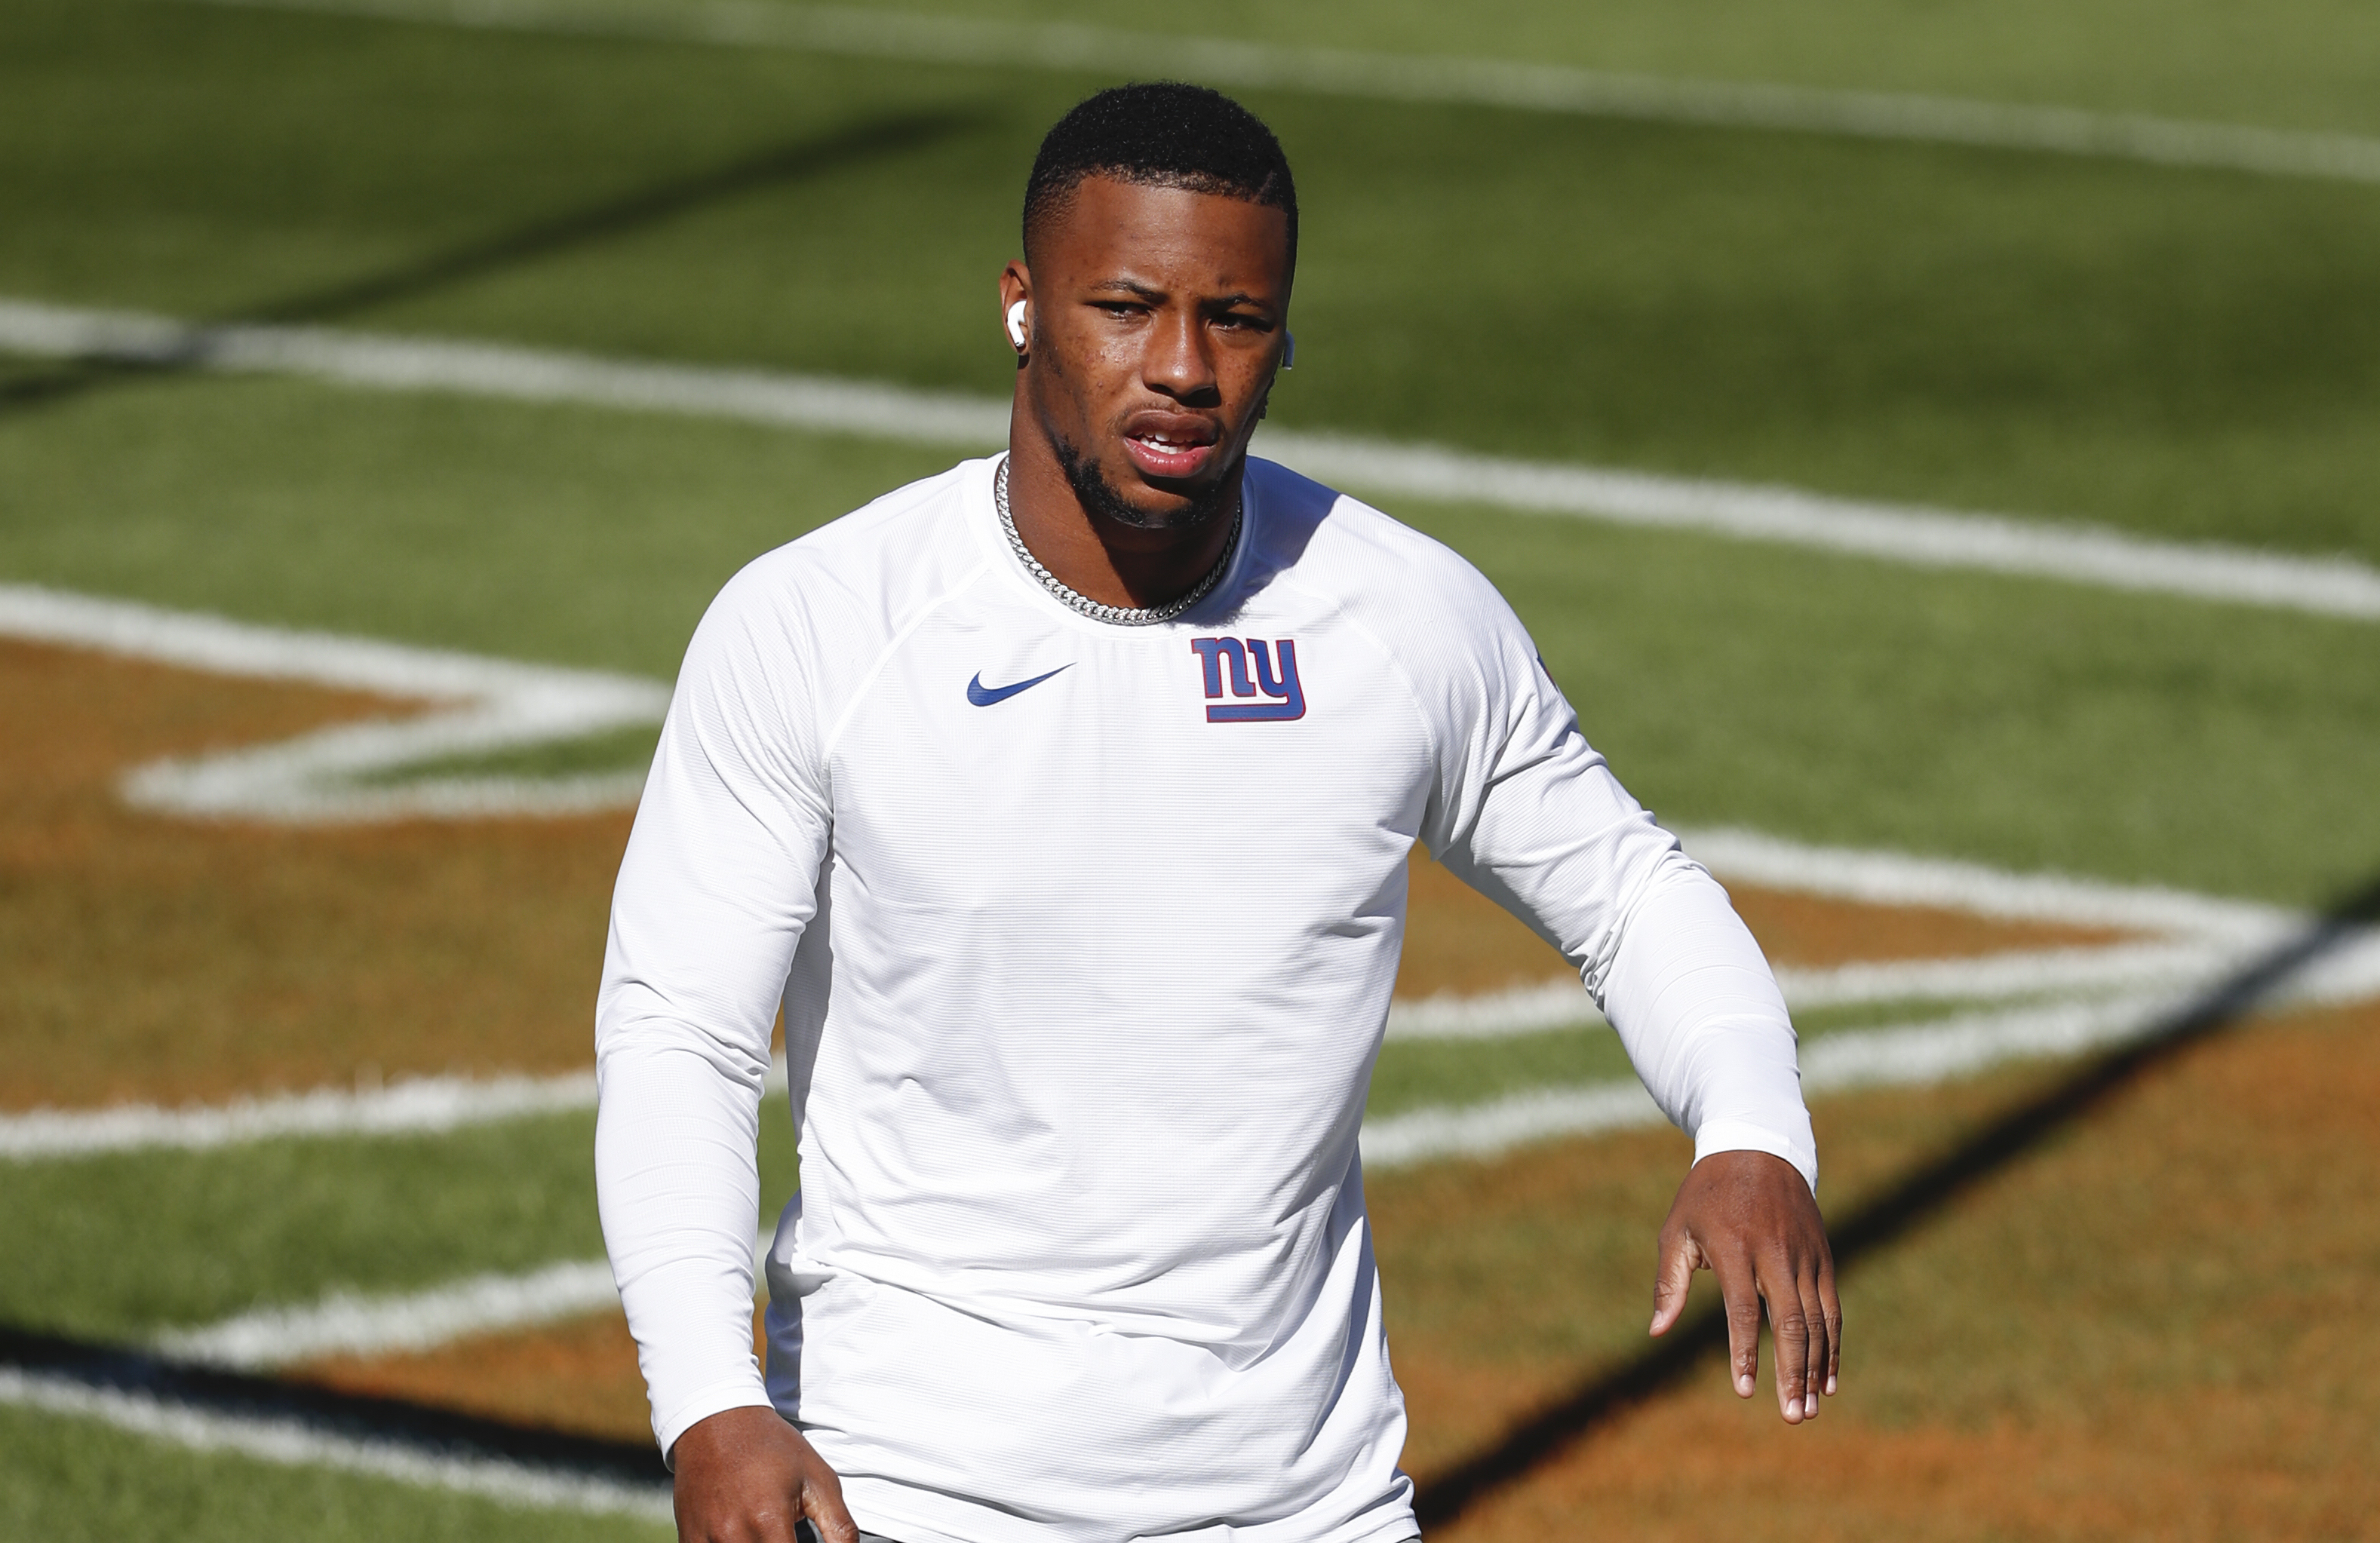 You think Saquon Barkley will play his entire career with Giants